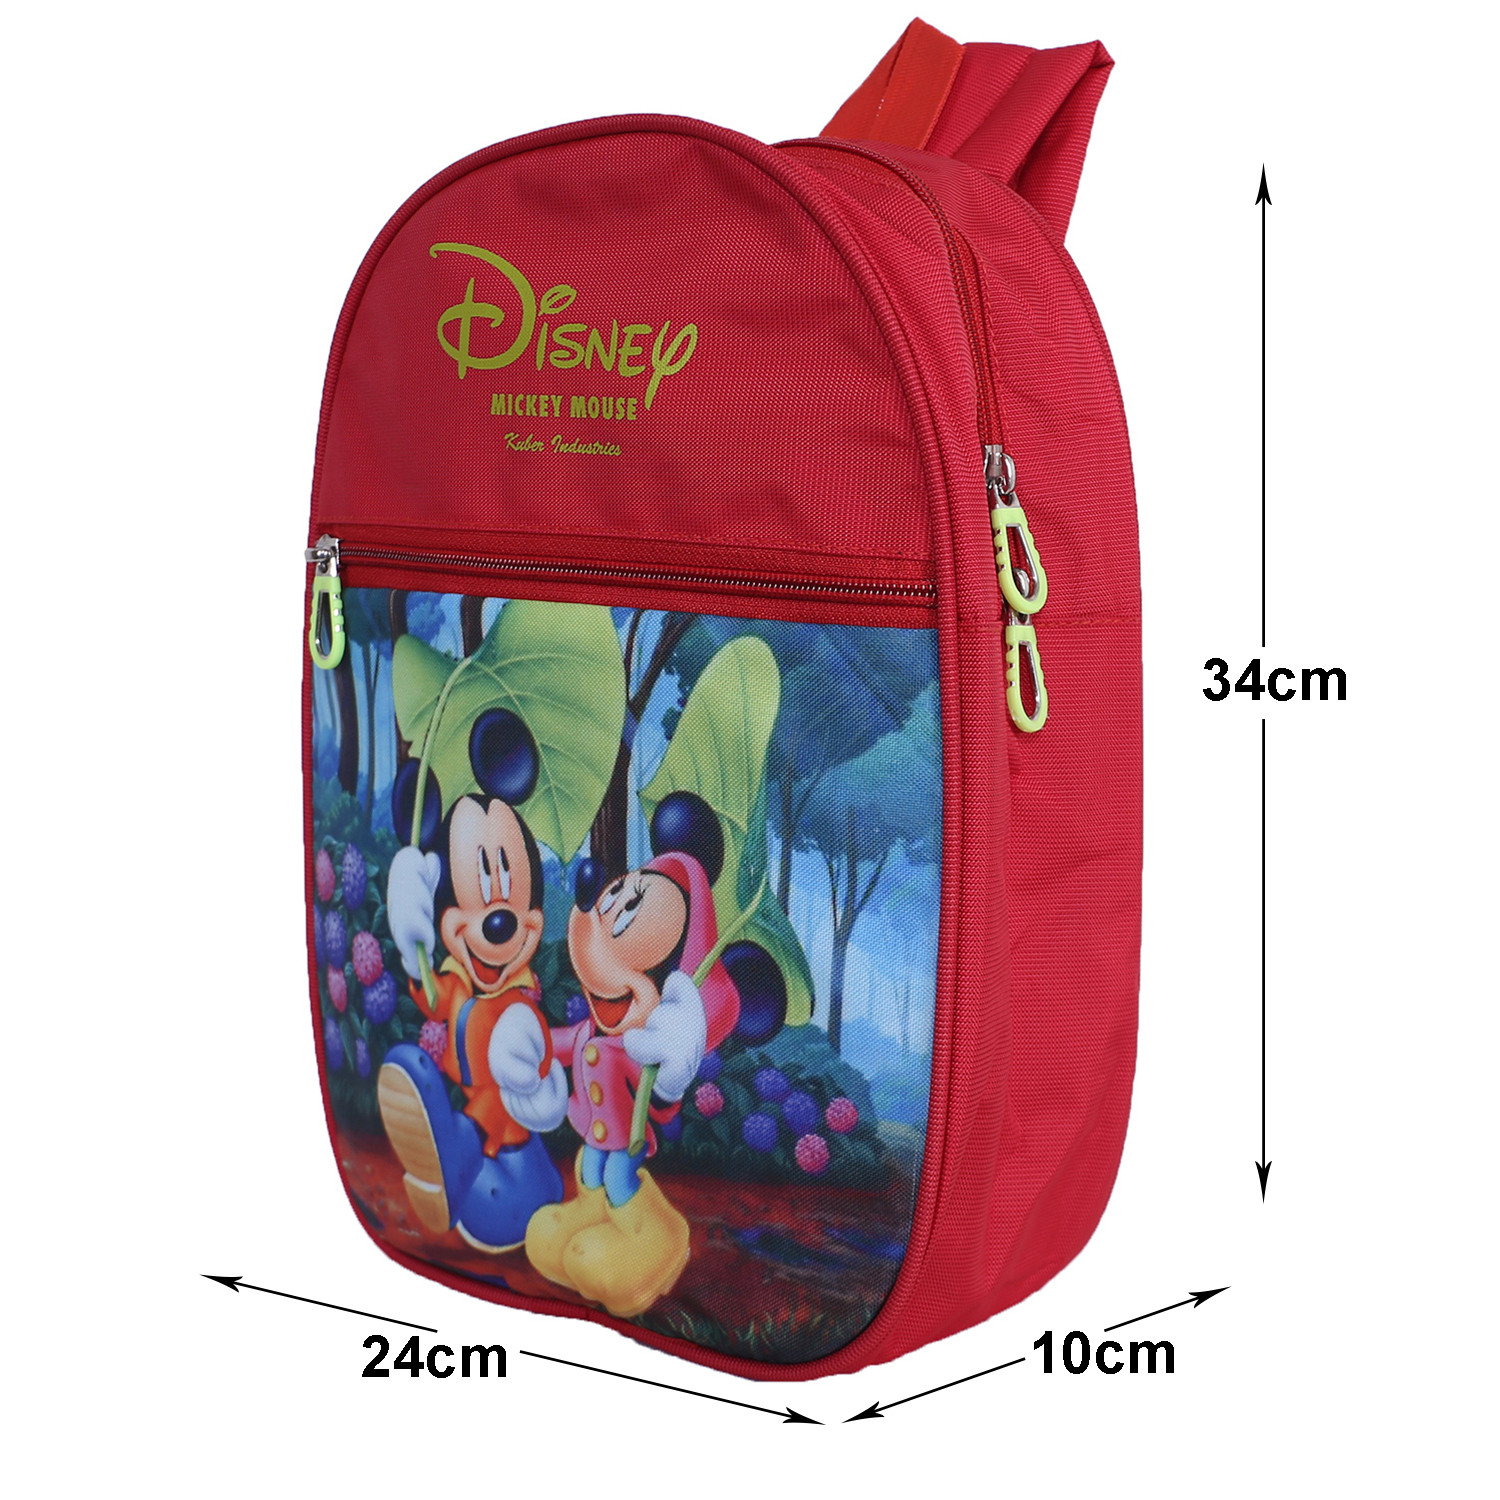 Kuber Industries Disney Mickey & Minnie School Bag|2 Compartment Rexine School Bagpack|School Bag for Kids|School Bags for Girls with Zipper Closure|Small Size (Red)